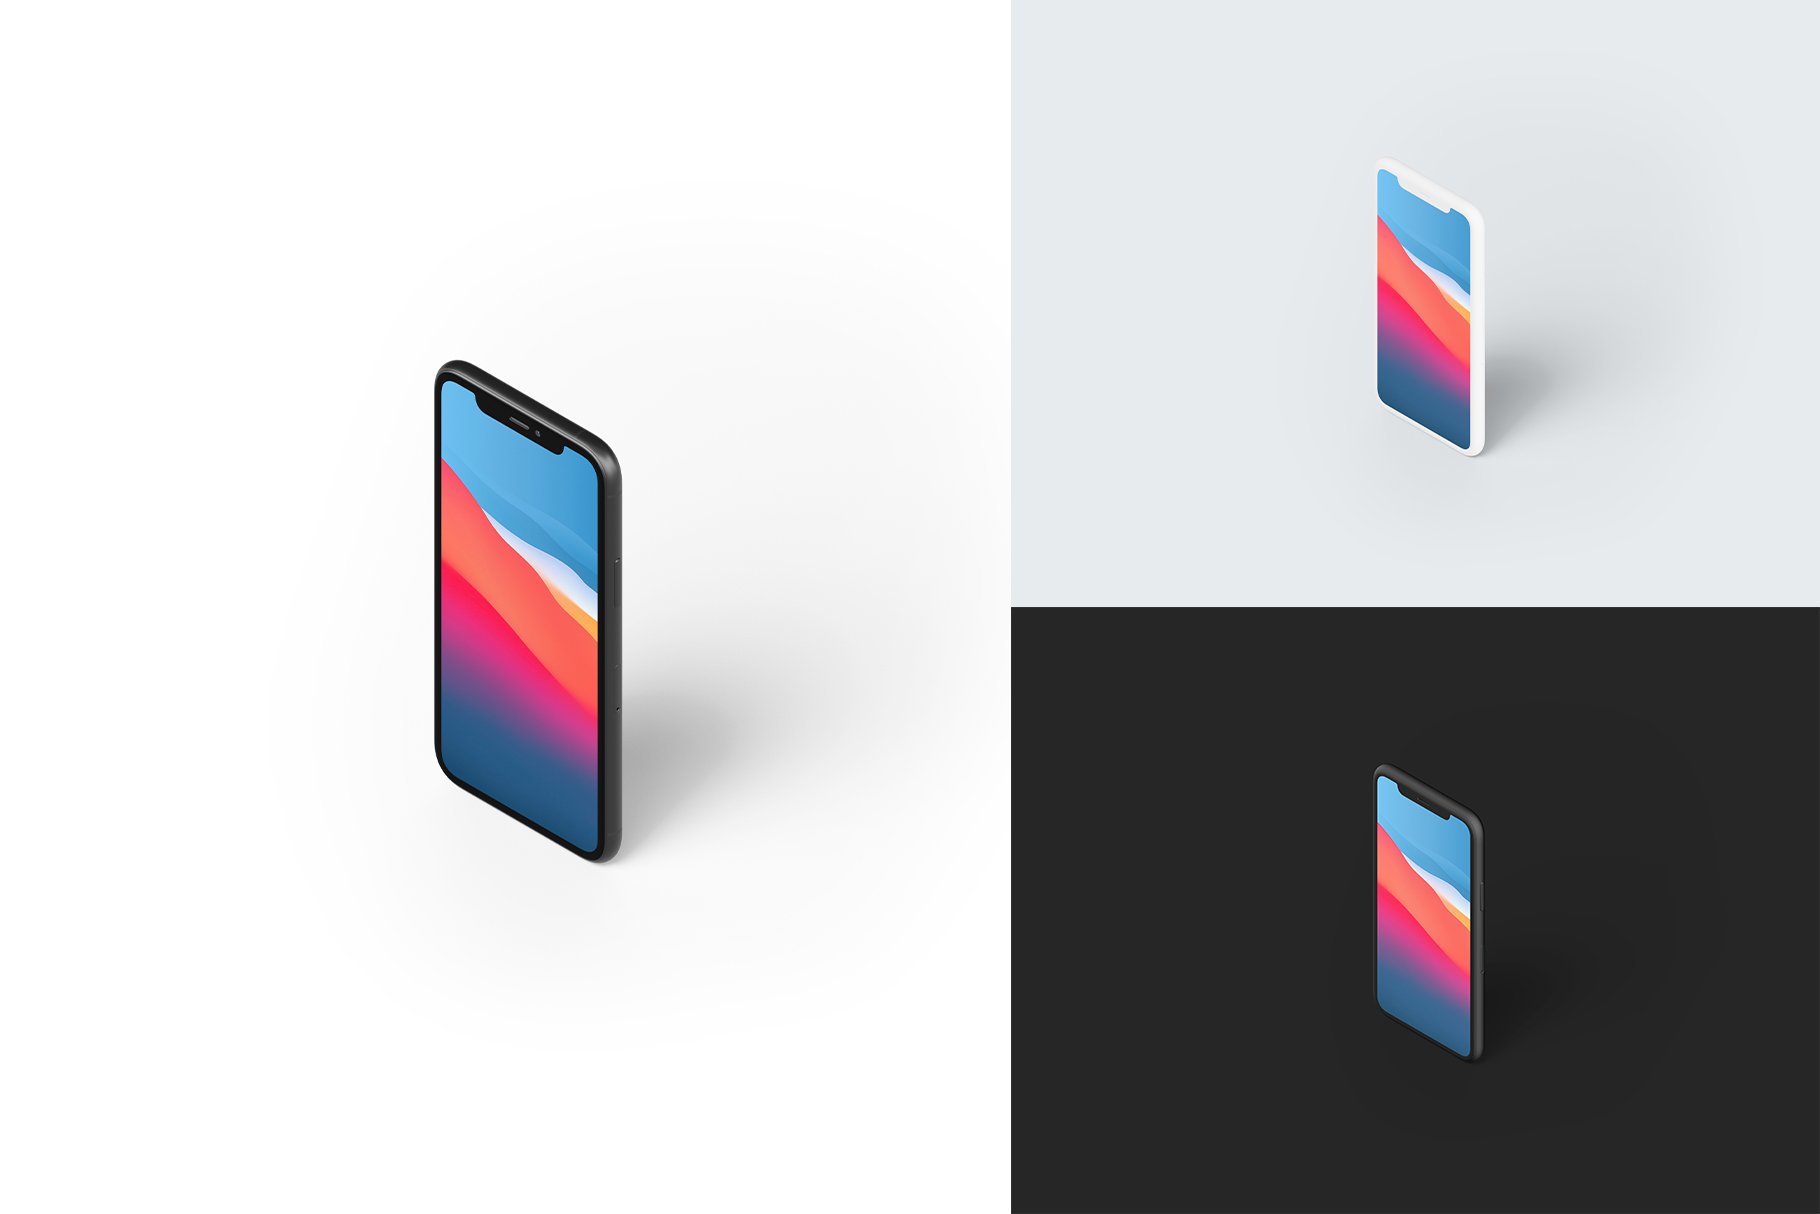 iphone 11 pro mockup pack by anthony boyd graphics 28s13v229 545